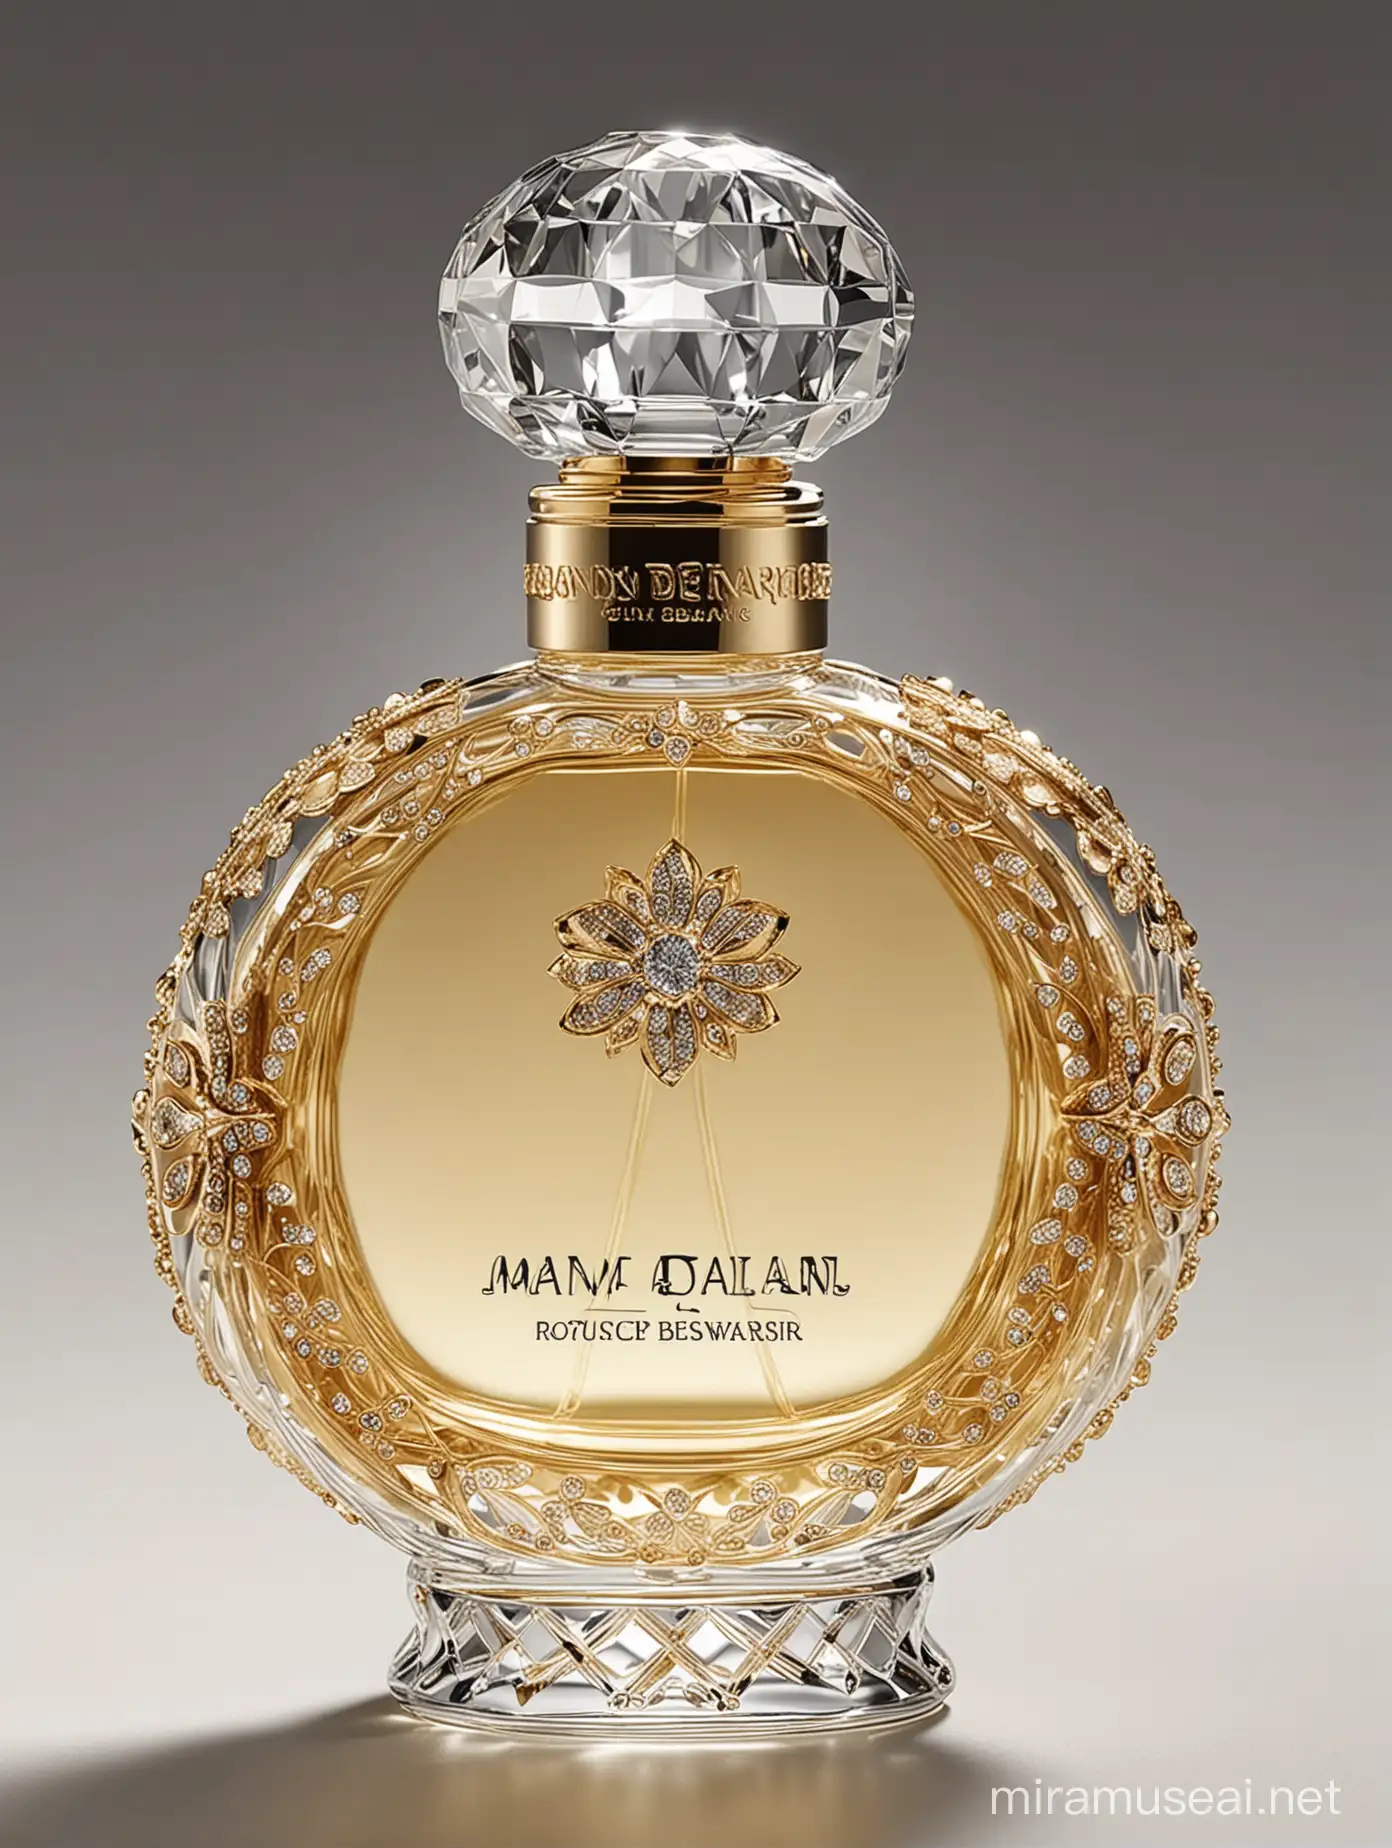 Luxurious Perfume Bottle Embodied with Elegance and Craftsmanship